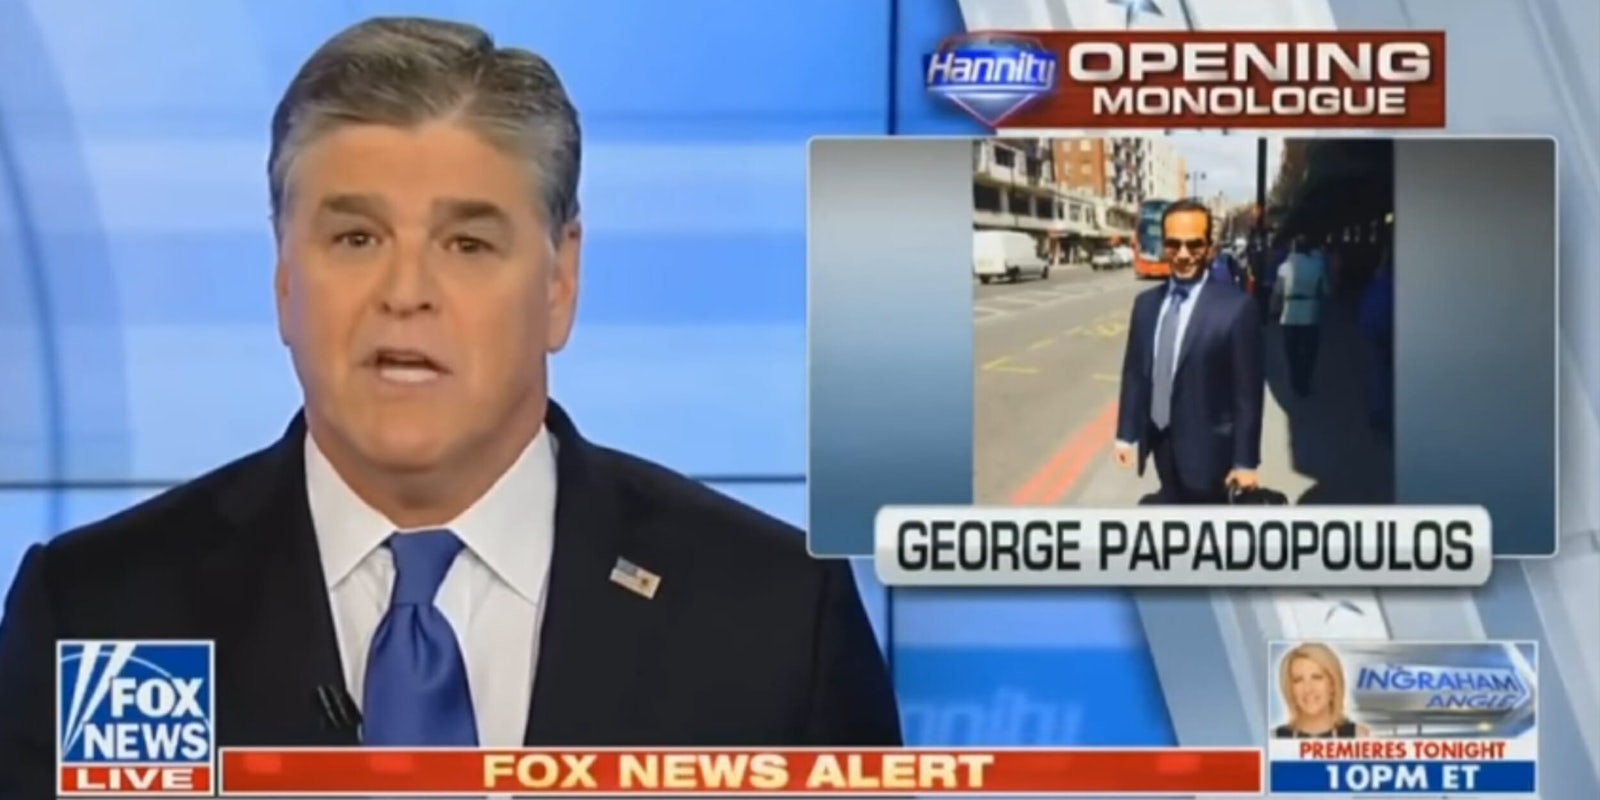 Sean Hannity went into a full throated defense of Donald Trump amid the charges brought up against former campaign members as part of the Russia probe.